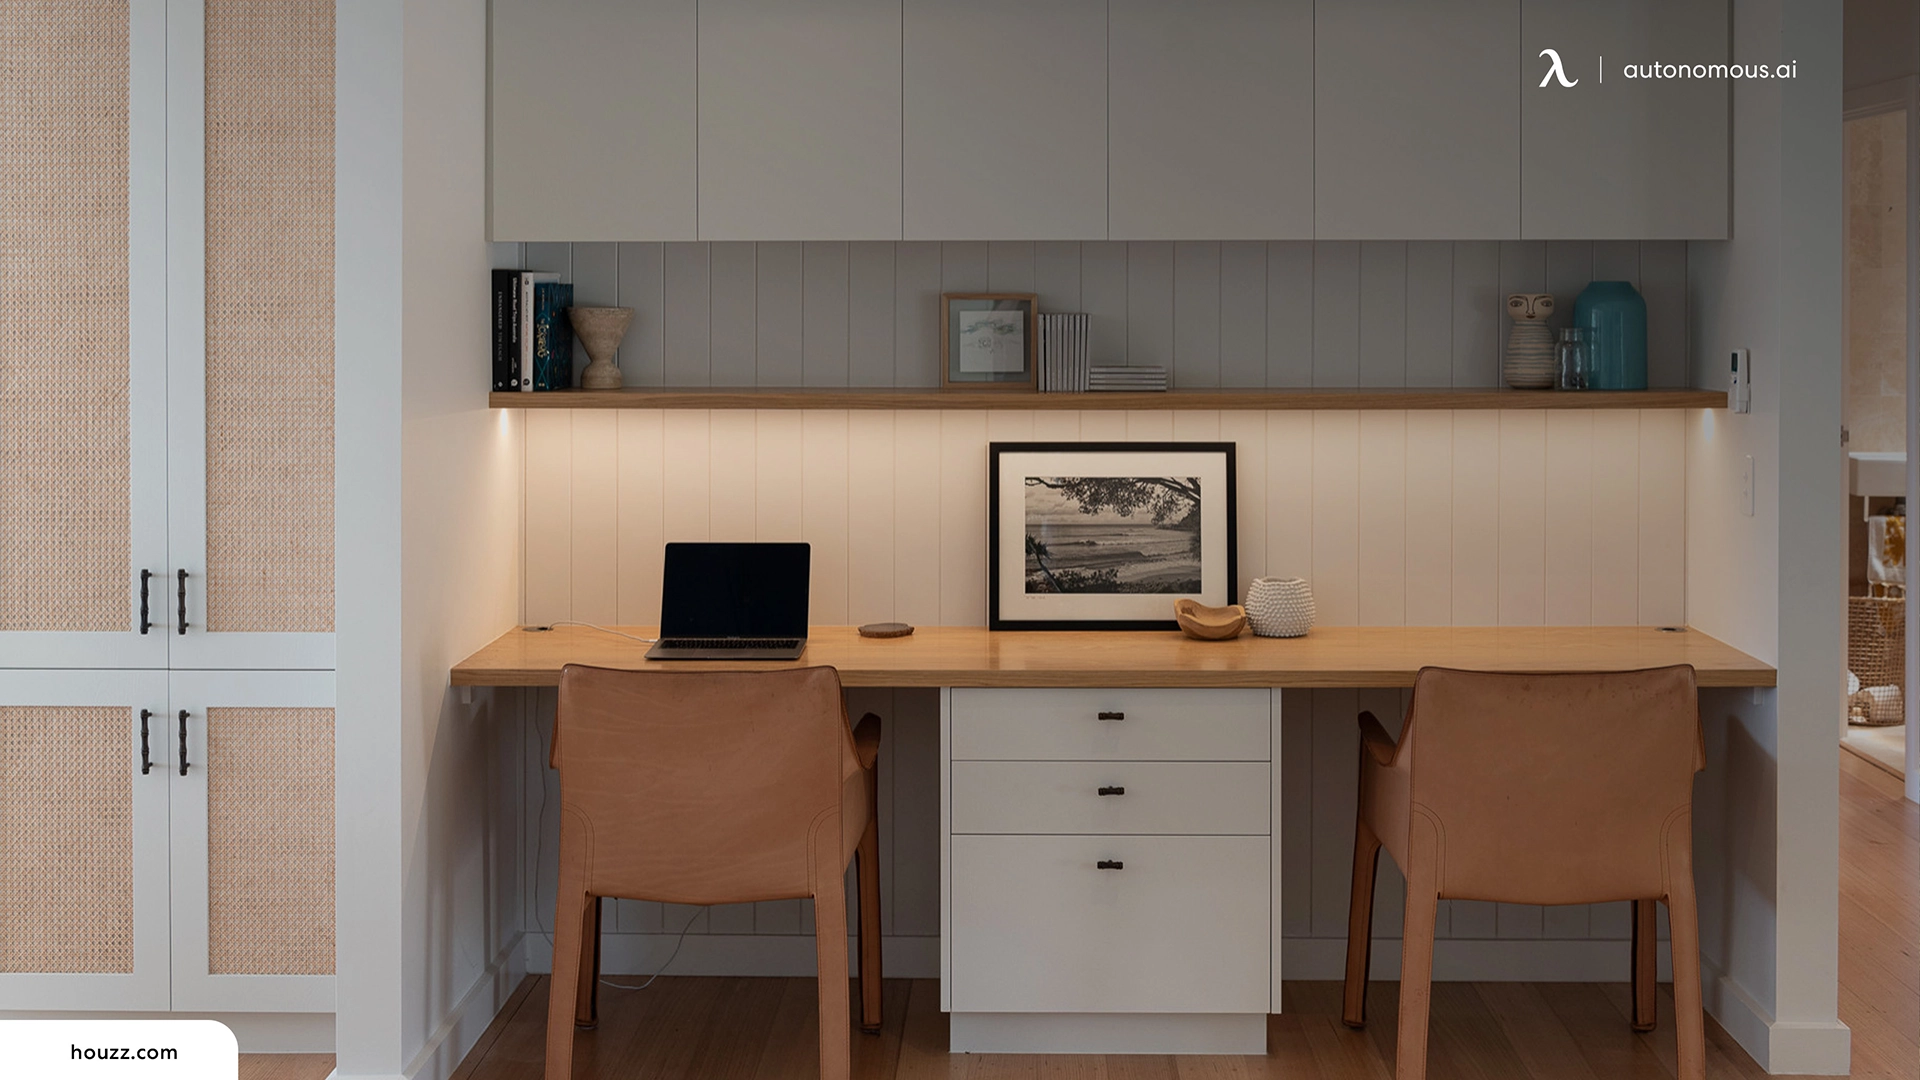 How to Choose the Best Desk Size for Your Workspace